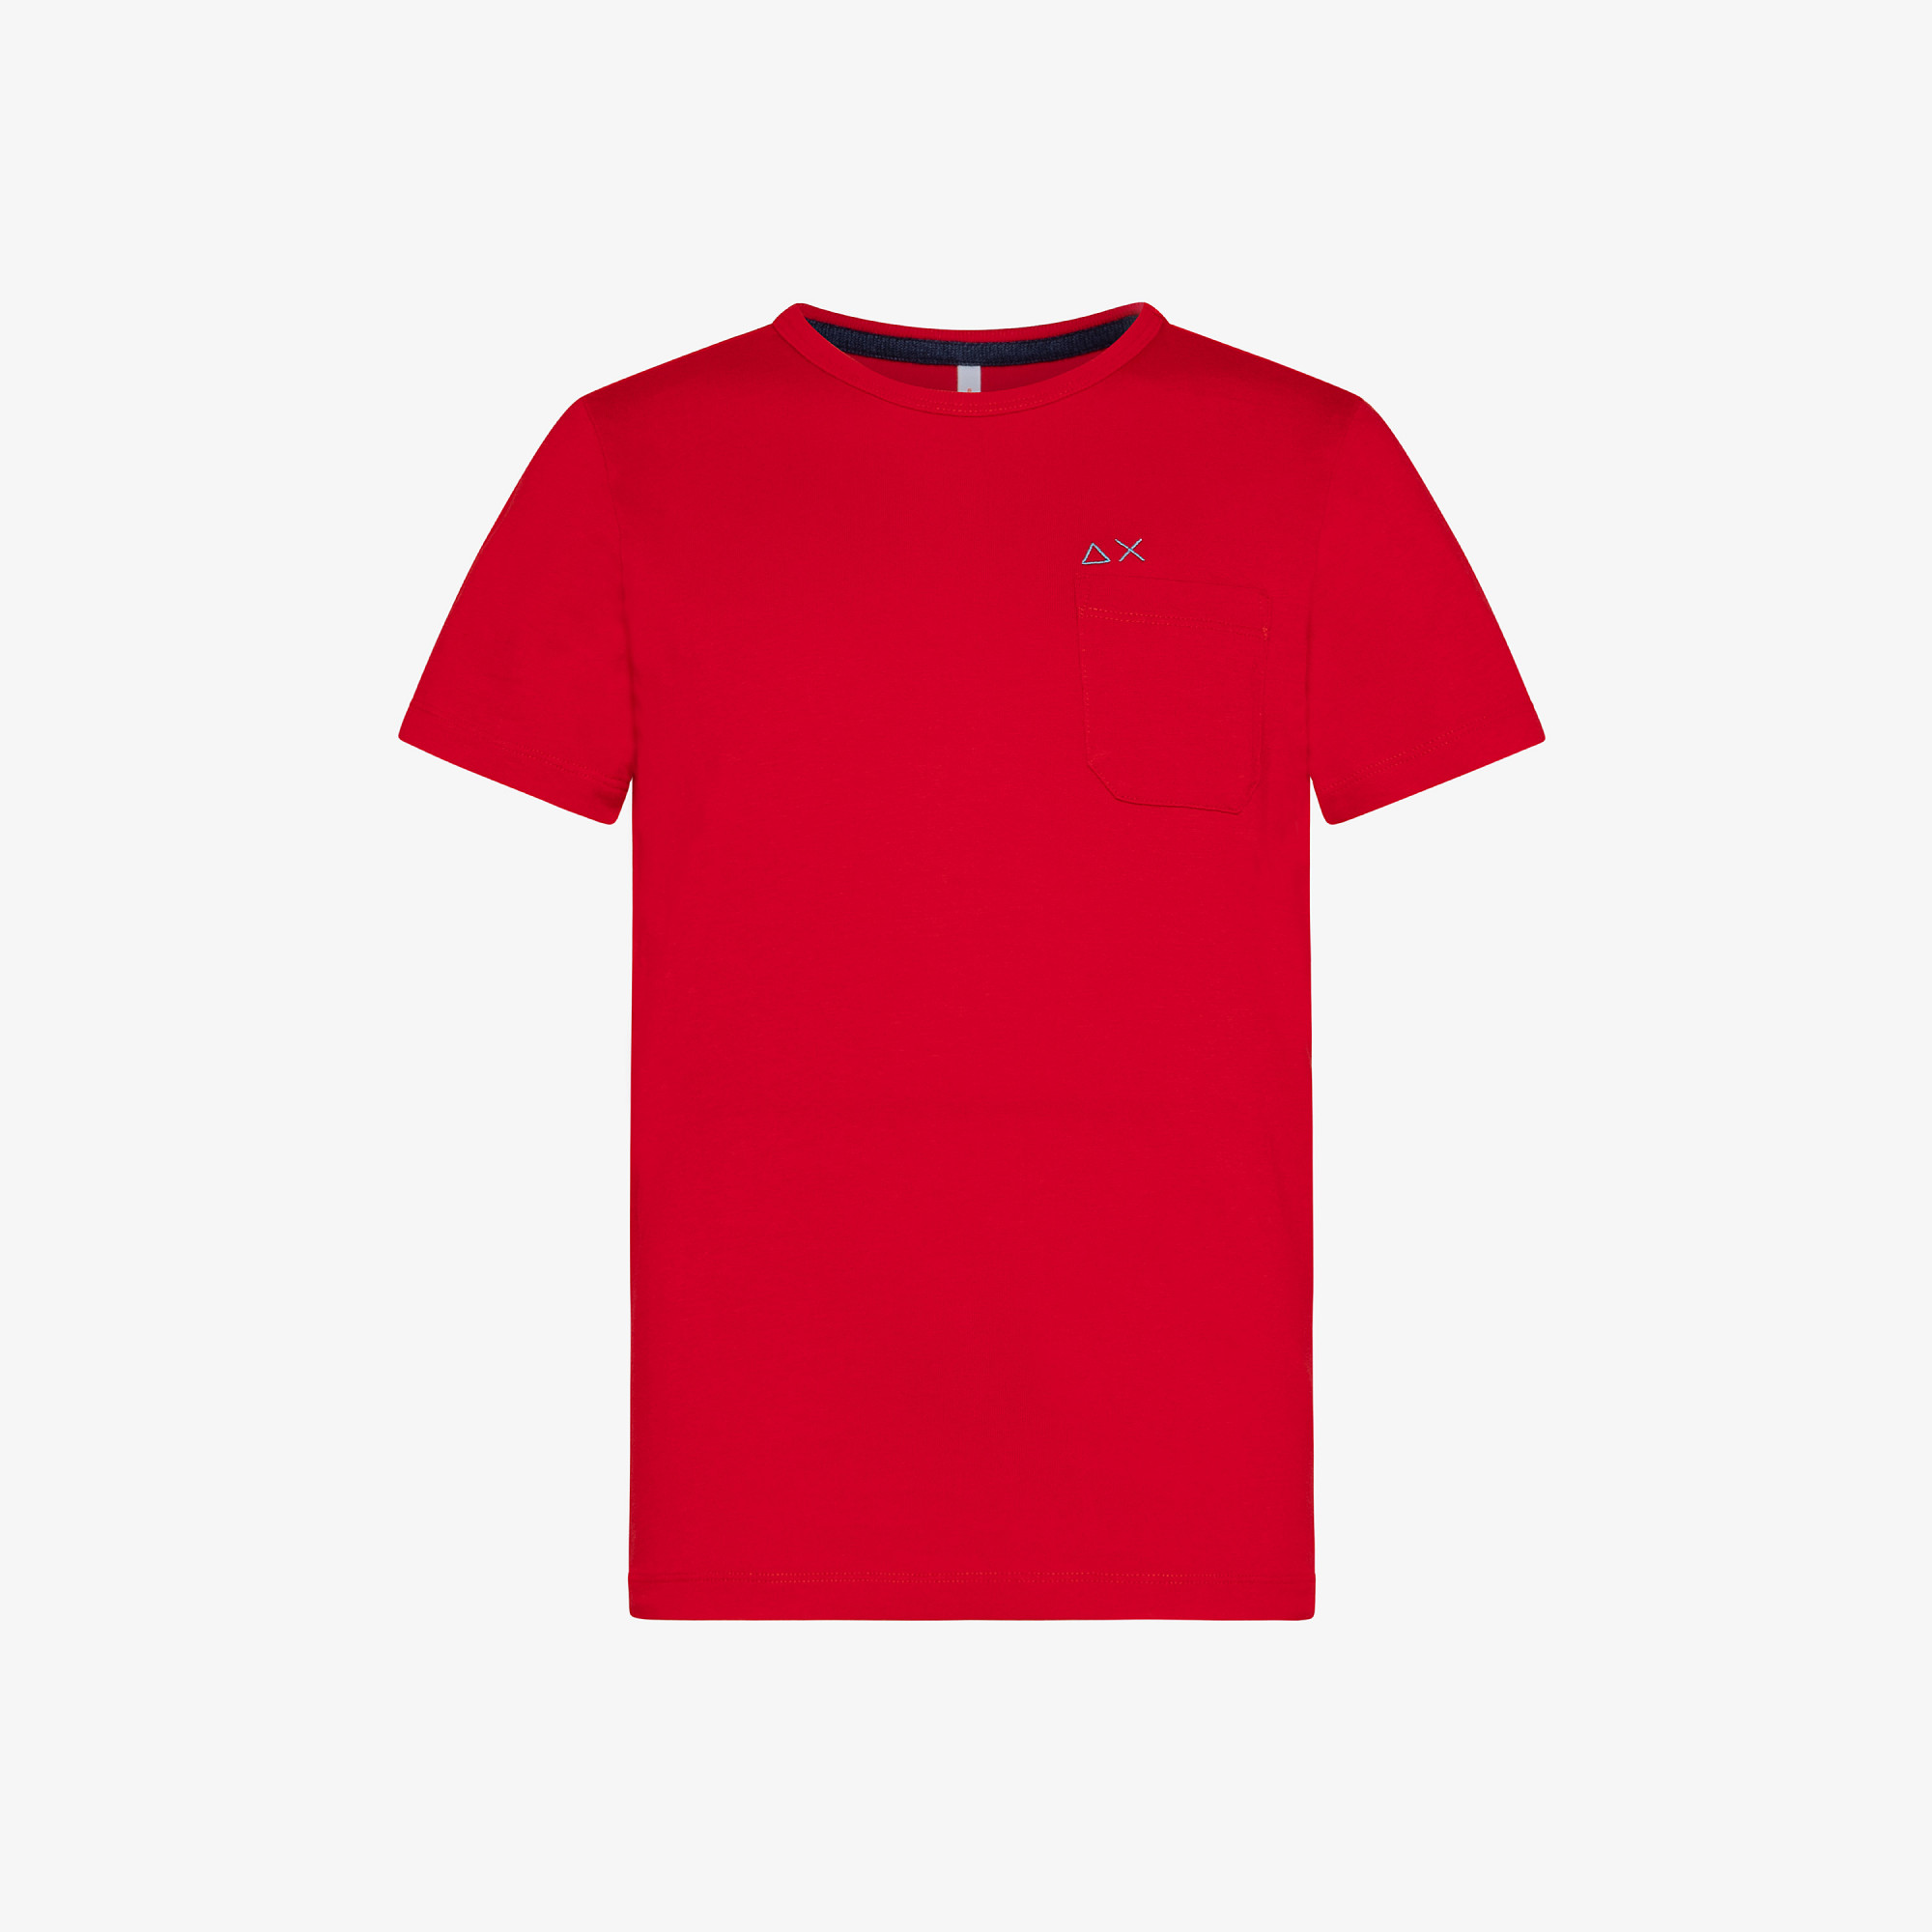 BOY'S T-SHIRT SOLID POCKET ROSSO FUOCO